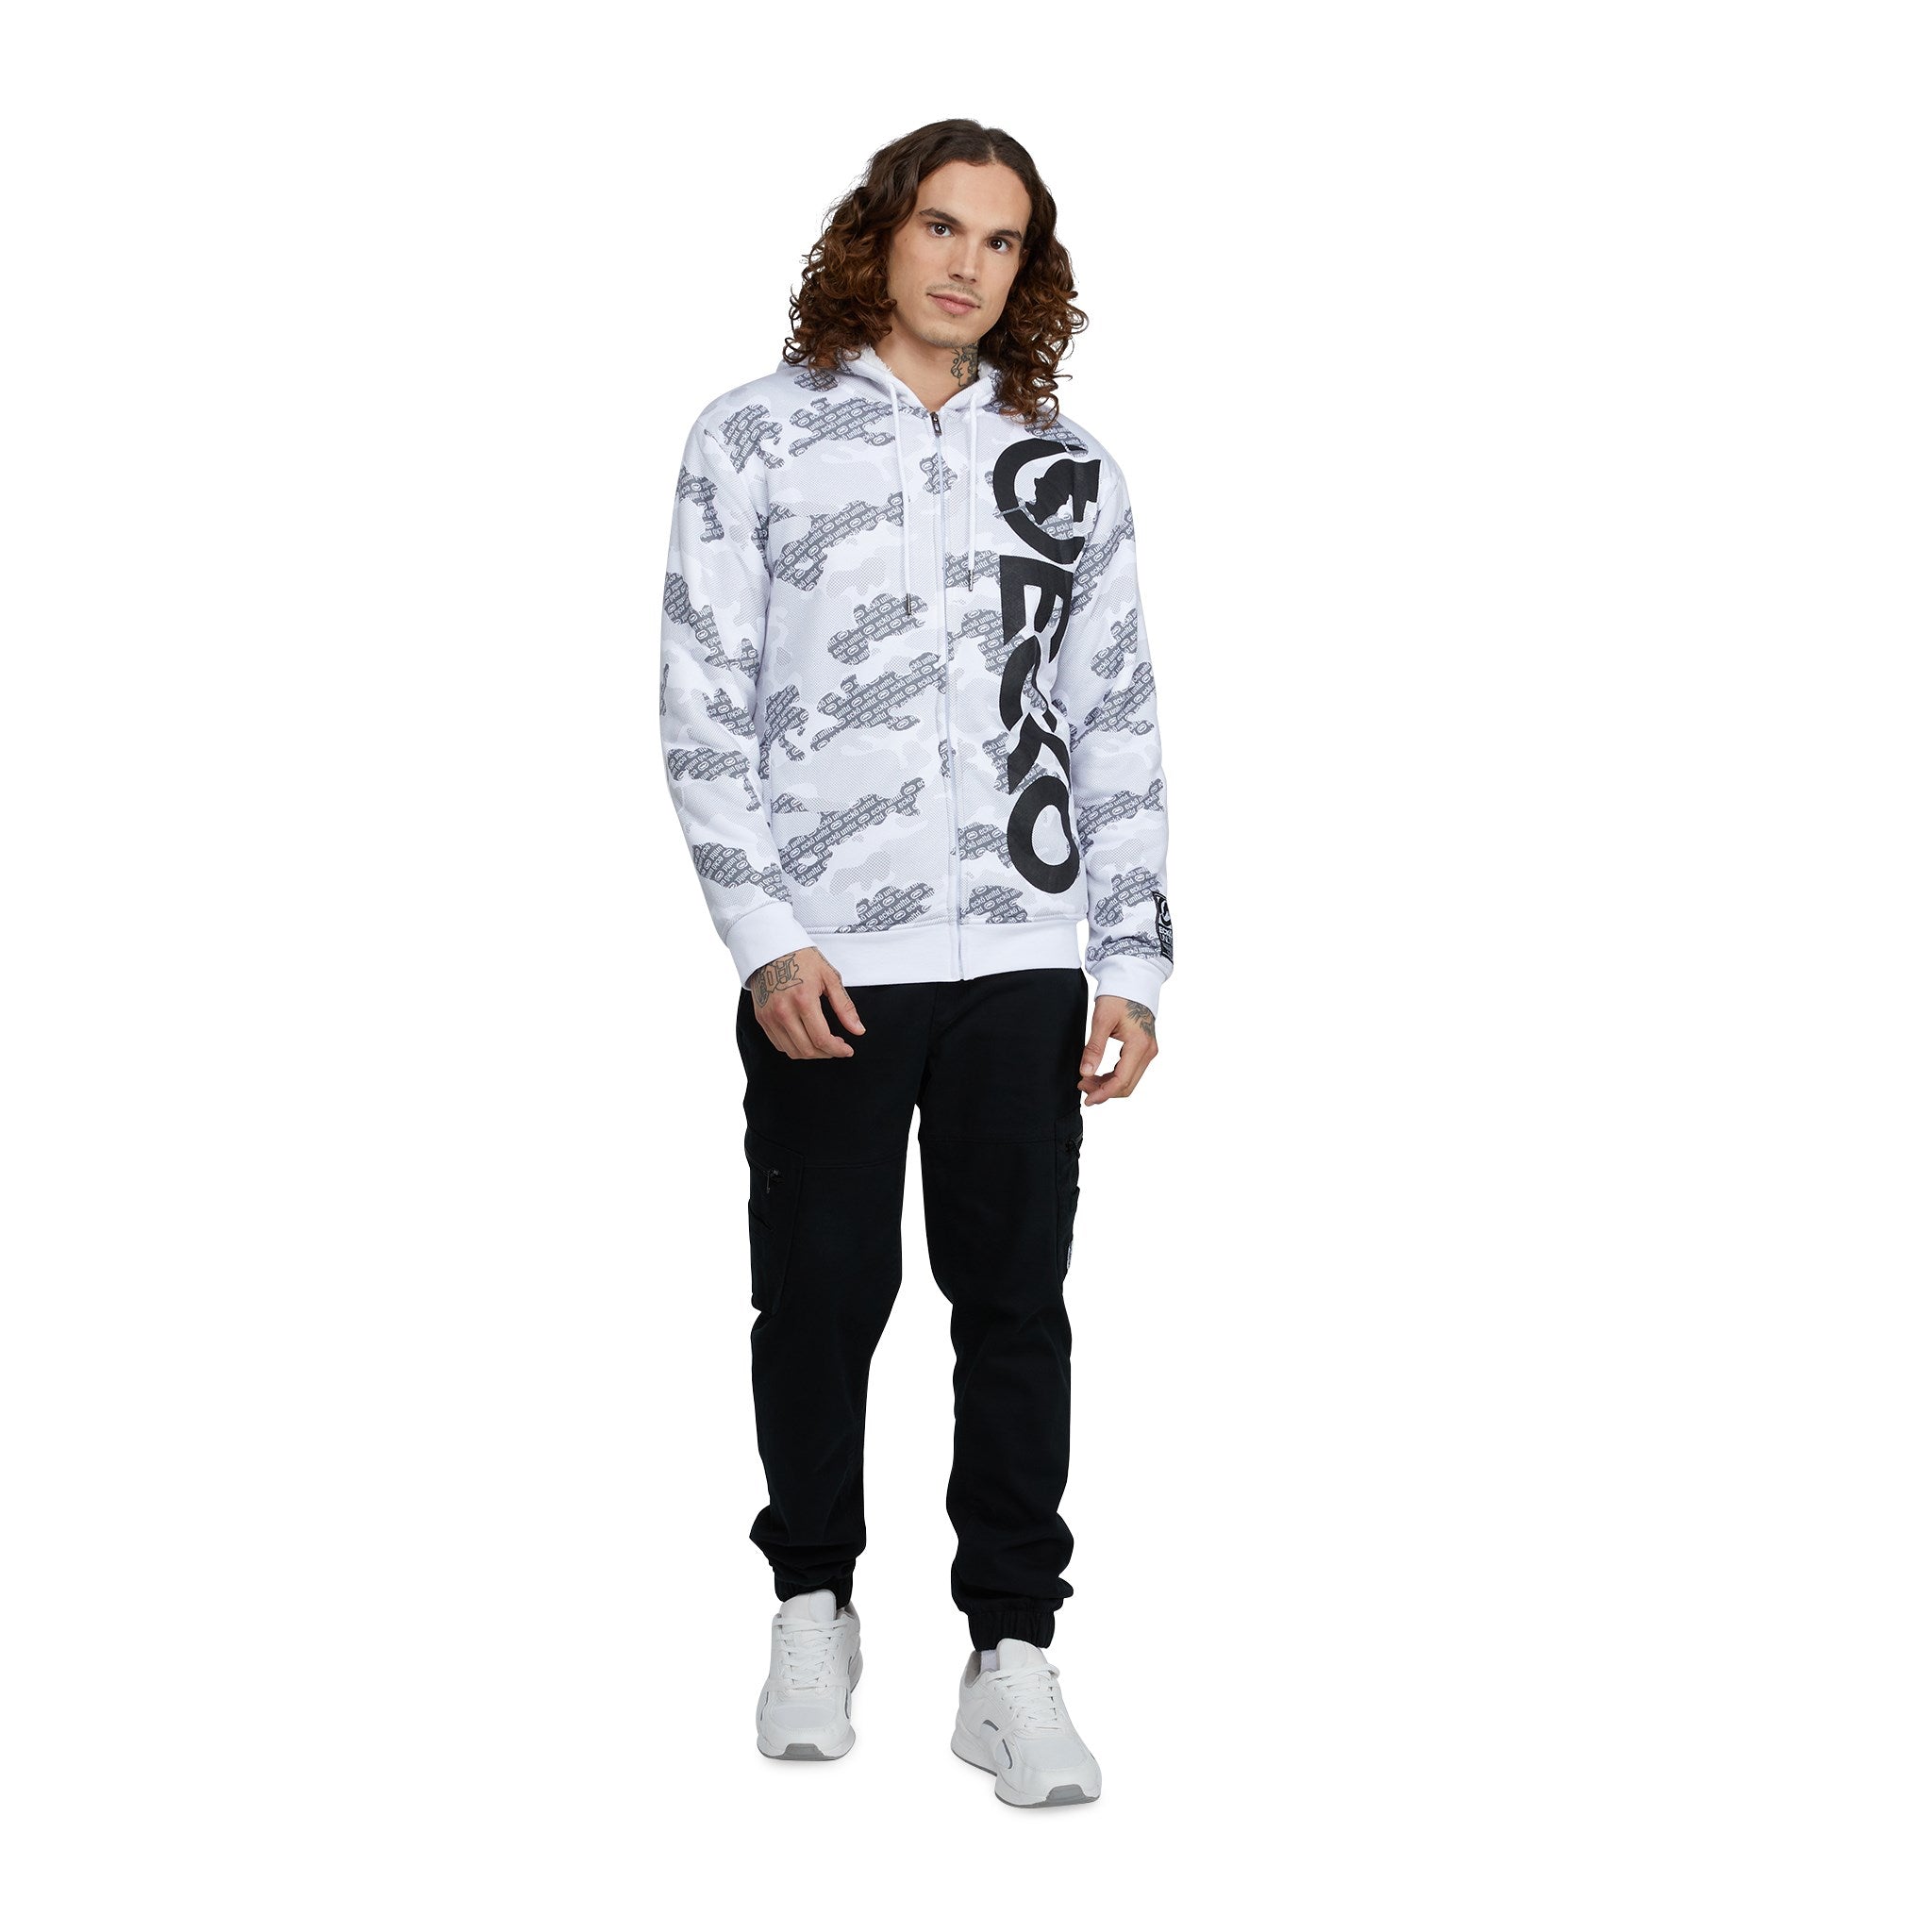 Far Out Sherpa Hoodie